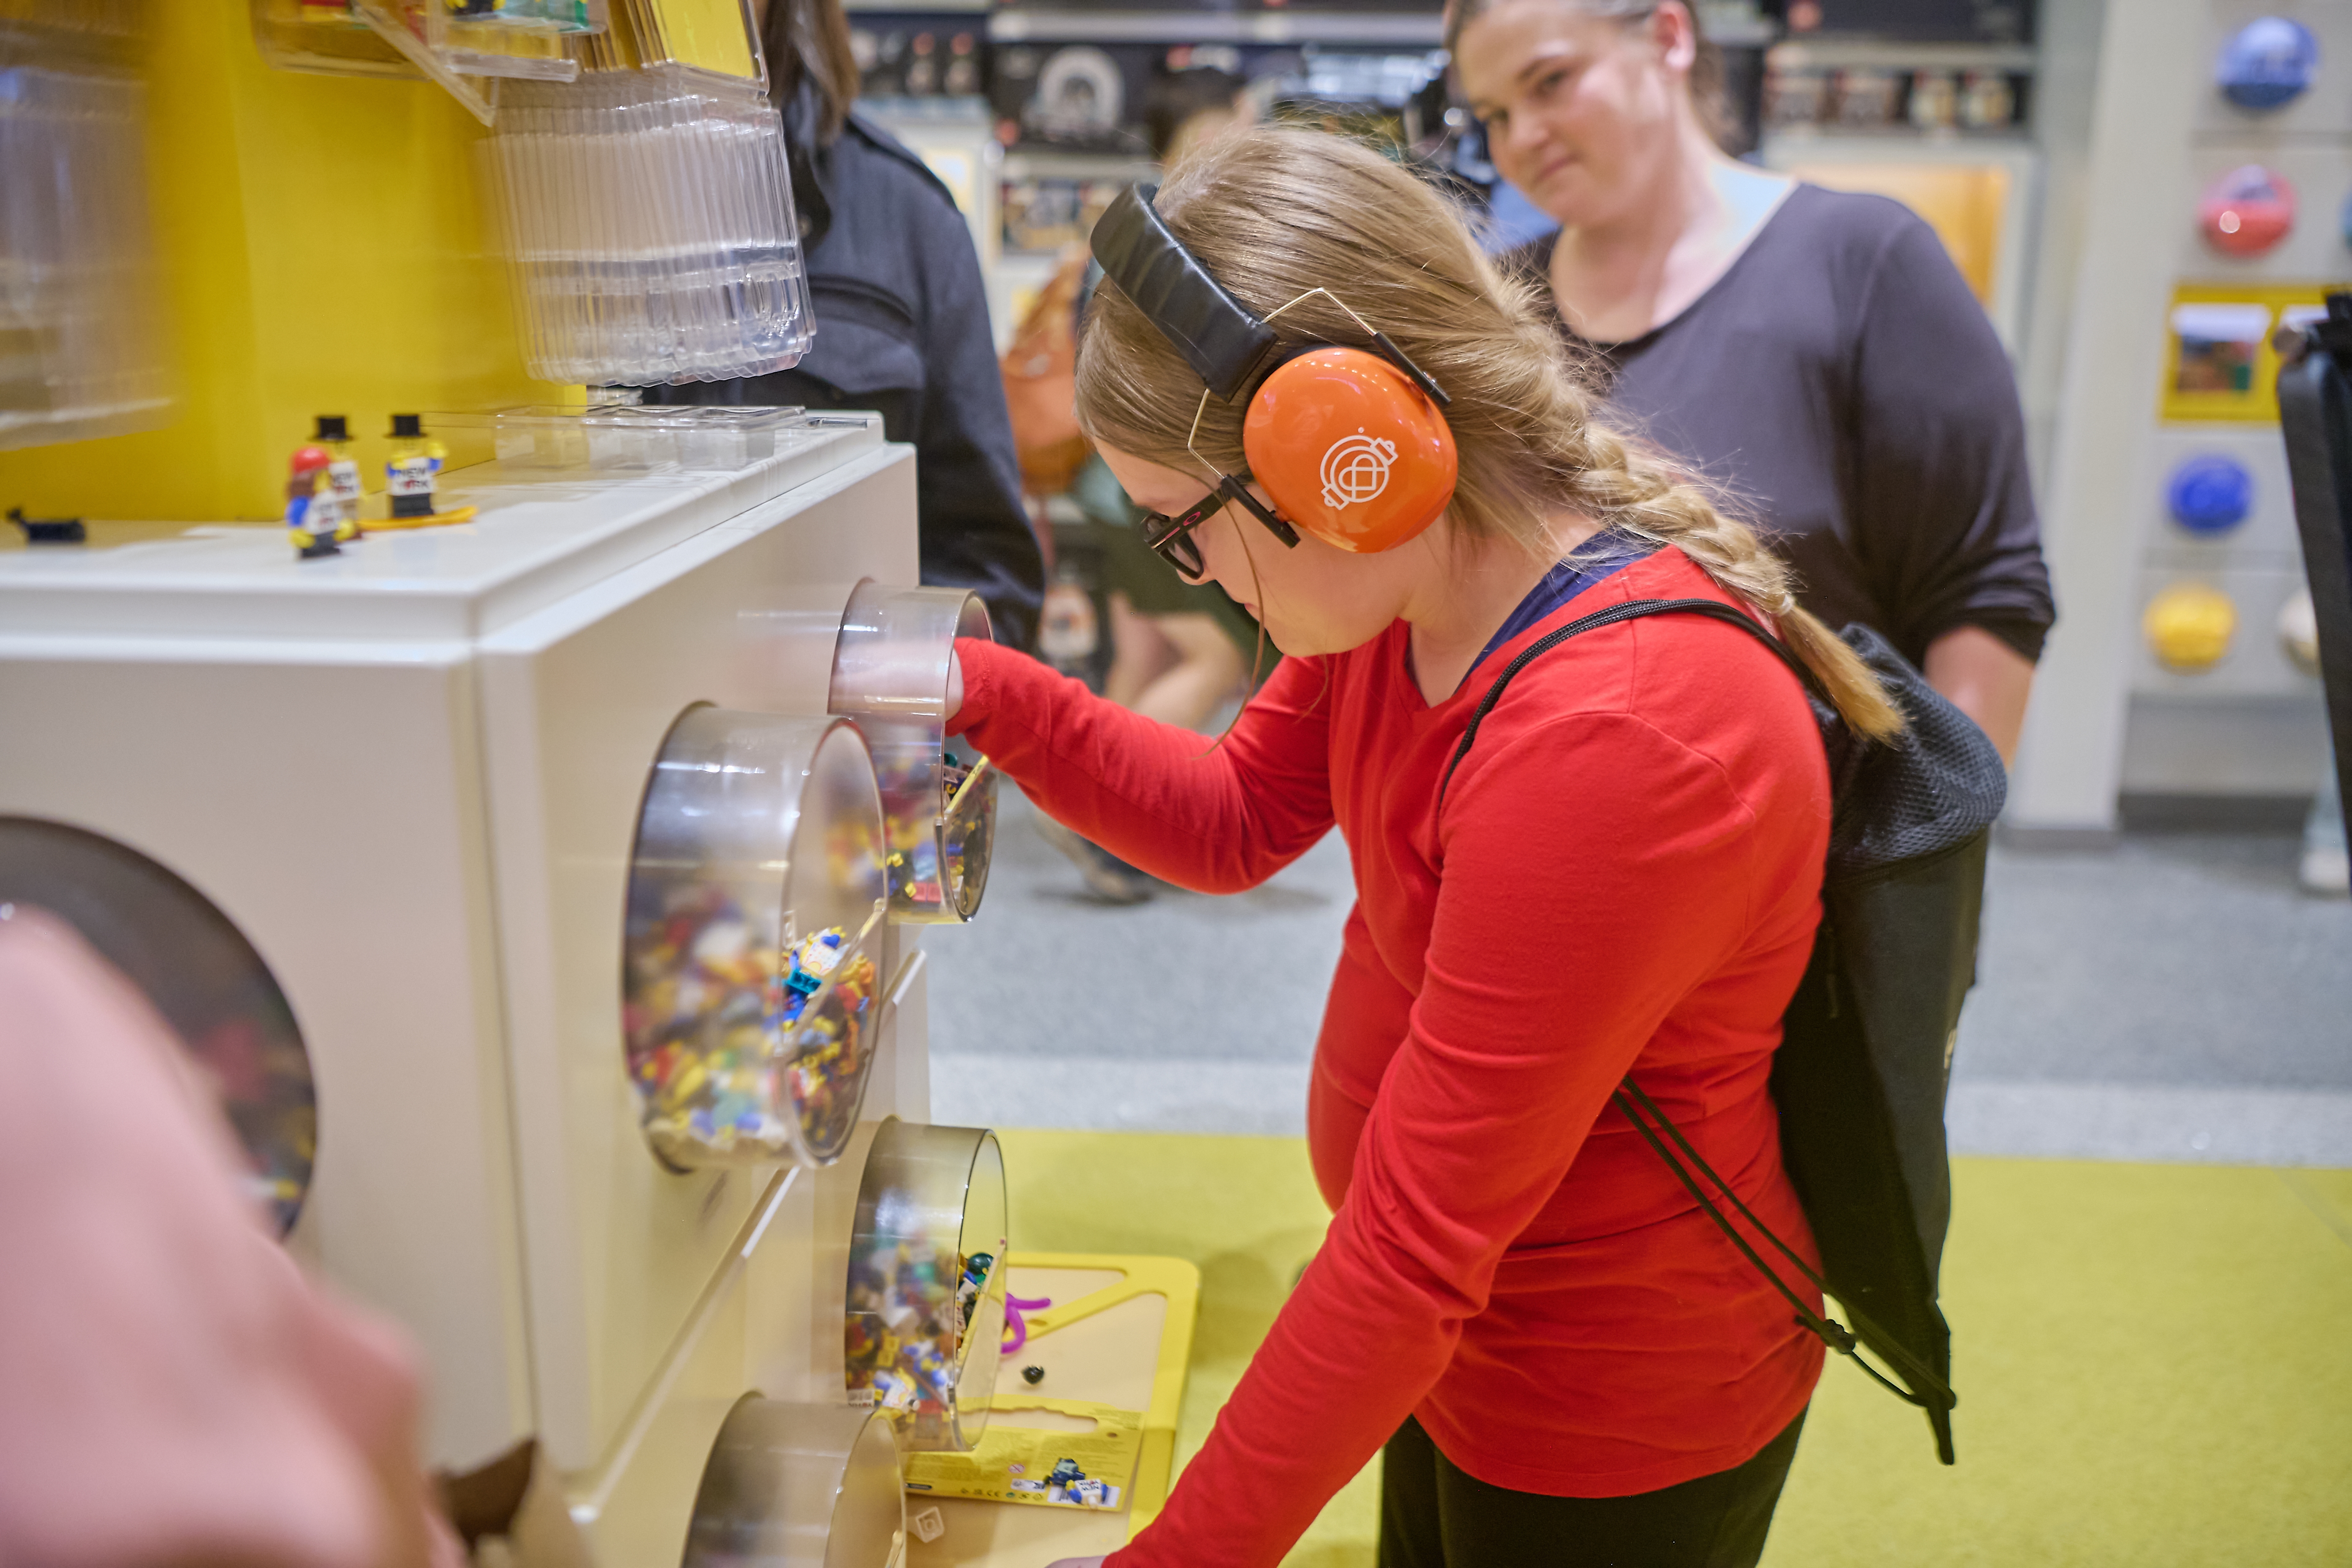 samantha, mom to Isabella who is 11 and autistic at the LEGO store flatiron in US trying out the Kulture City sensory bags